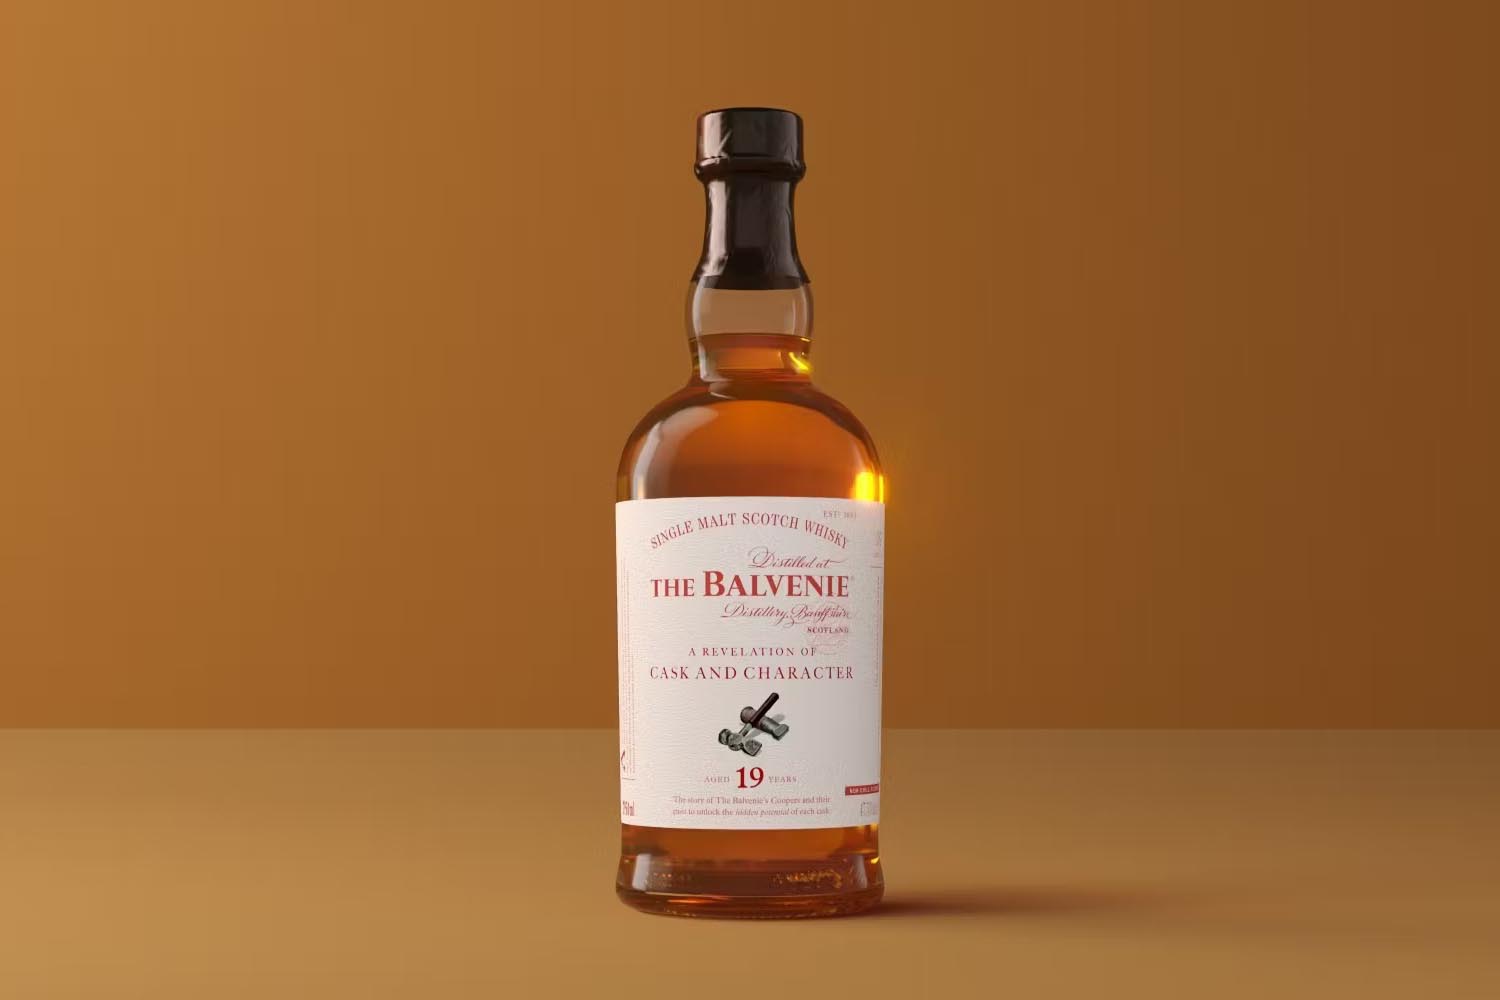 The Balvenie Stories: A Revelation of Cask and Character